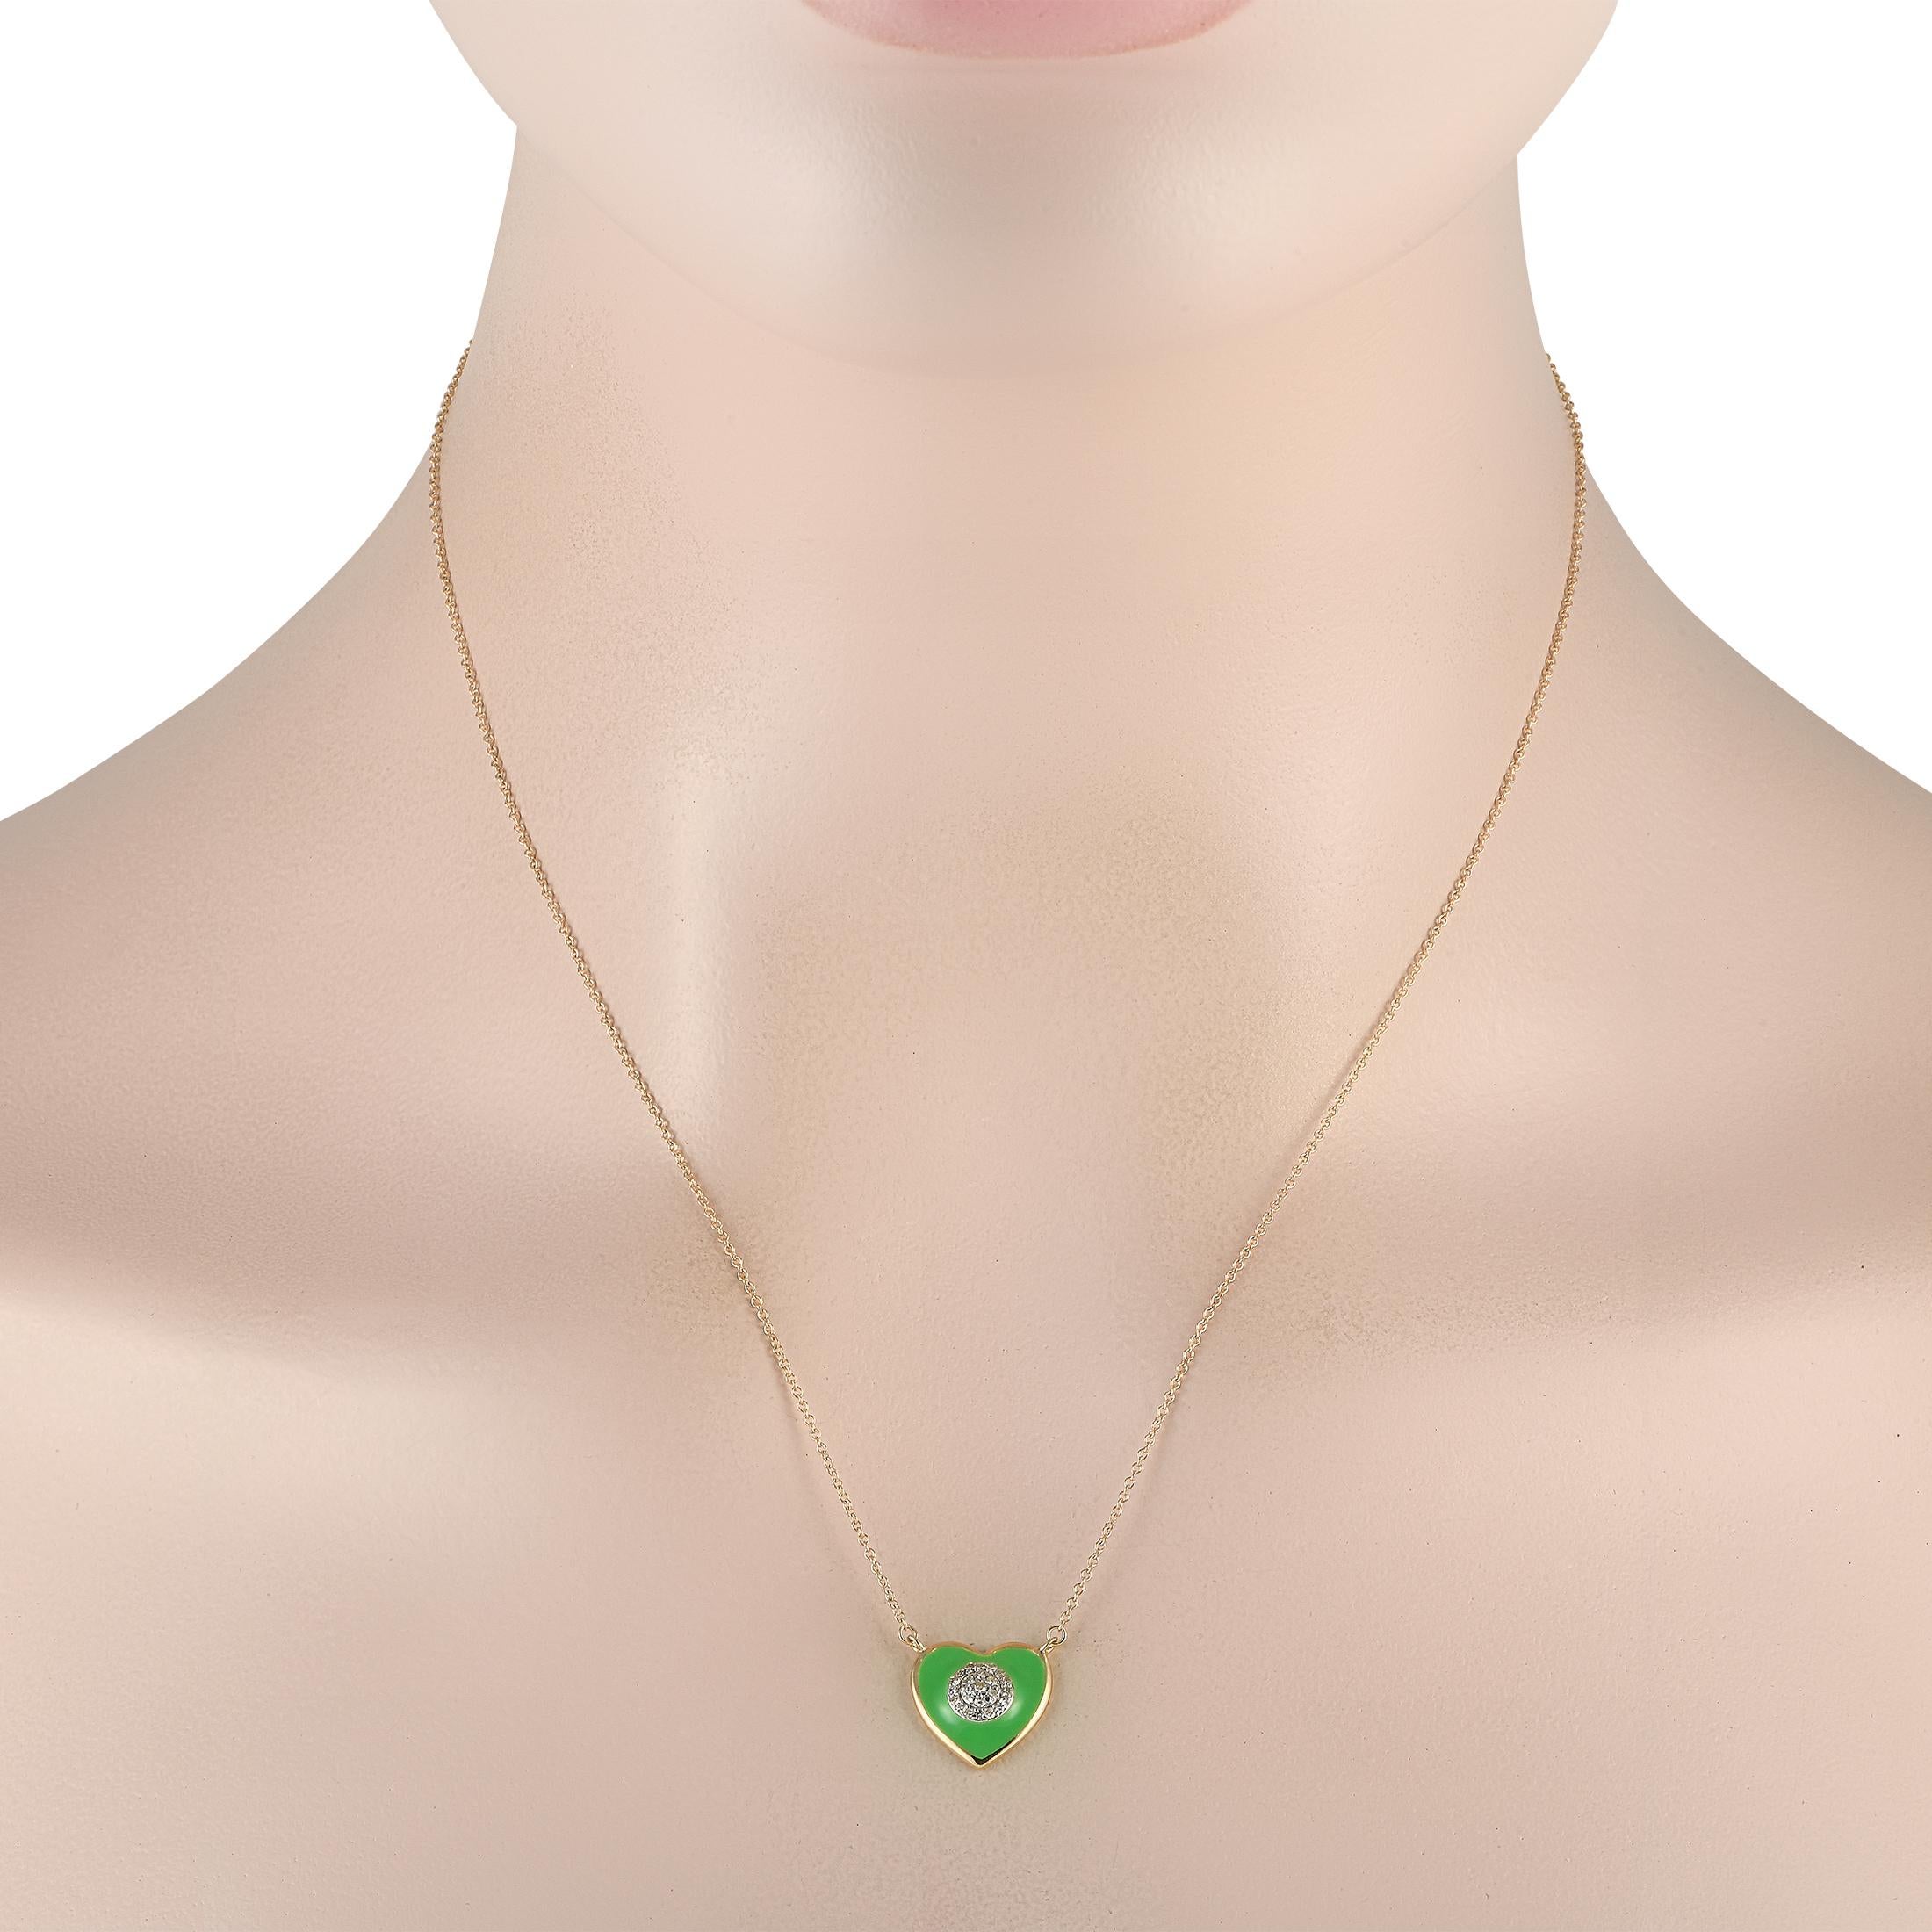 A green heart is said to symbolize gratitude and growth. Get this LB Exclusive heart necklace with a green enameled heart pendant for yourself, or someone you care about, to celebrate a new beginning or the achievement of a goal. This lovely piece